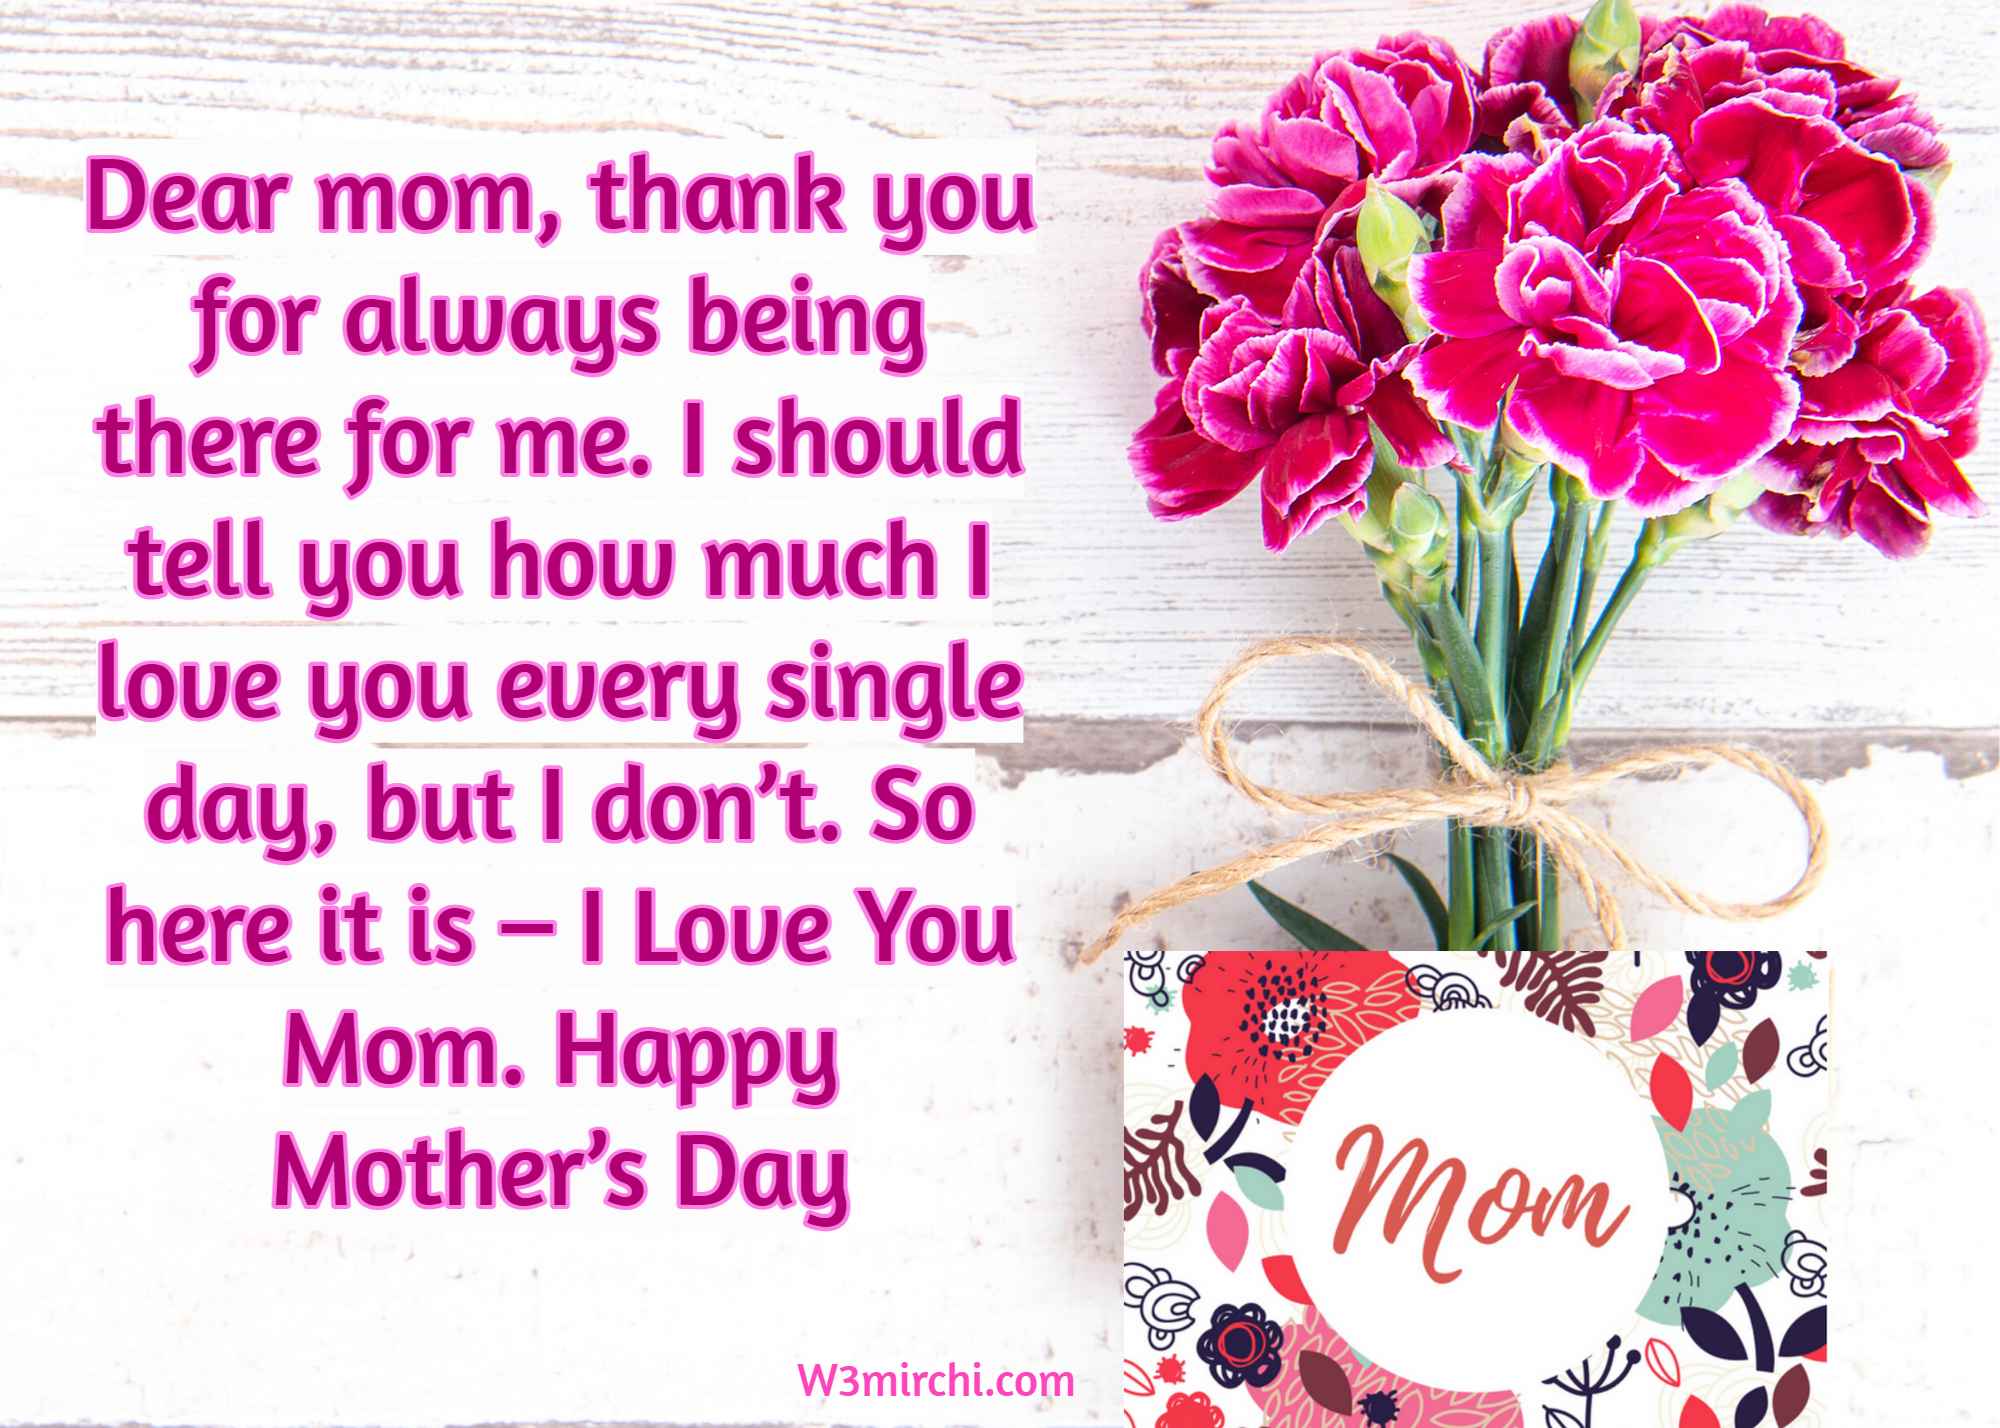 I Love You Mom. Happy Mother’s Day